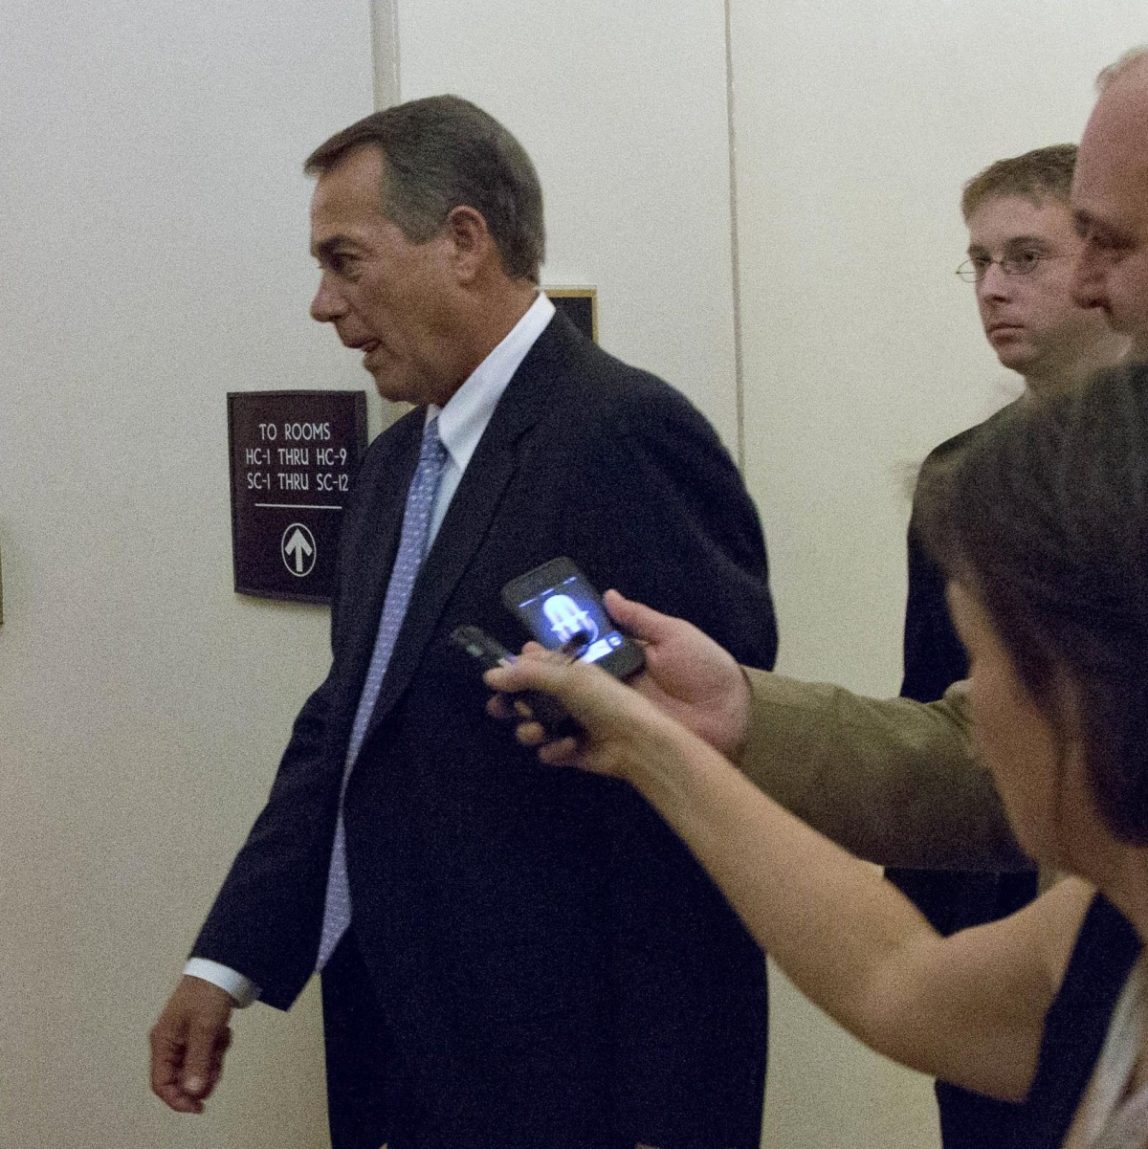 Speaker John Boehner of Ohio, center, departs, with reporters nearby after a House Republicans meeting on Capitol Hill, Thursday, Dec. 20, 2012 in Washington. (AP Photo/Alex Brandon)